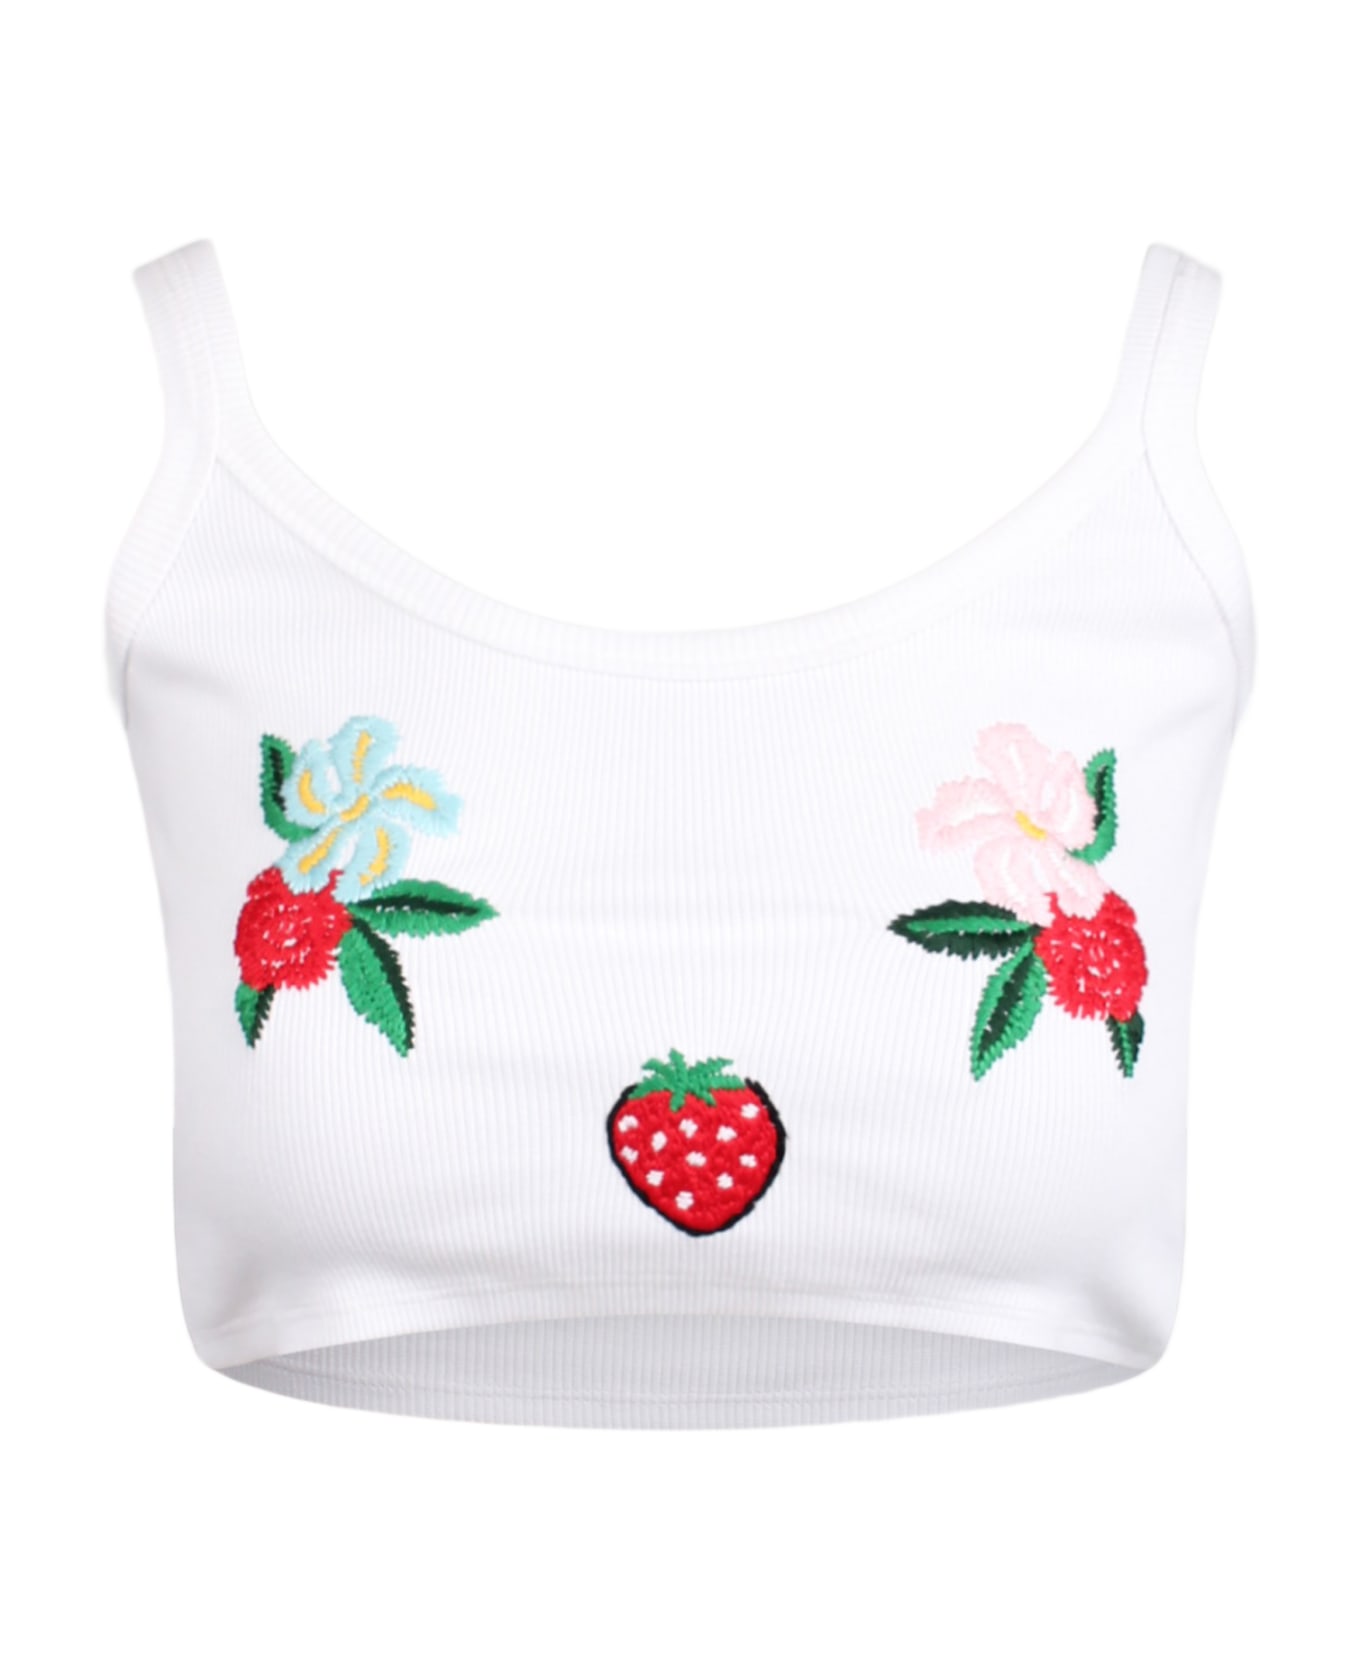 Fiorucci Embroidered Crop Tank Top タンクトップ